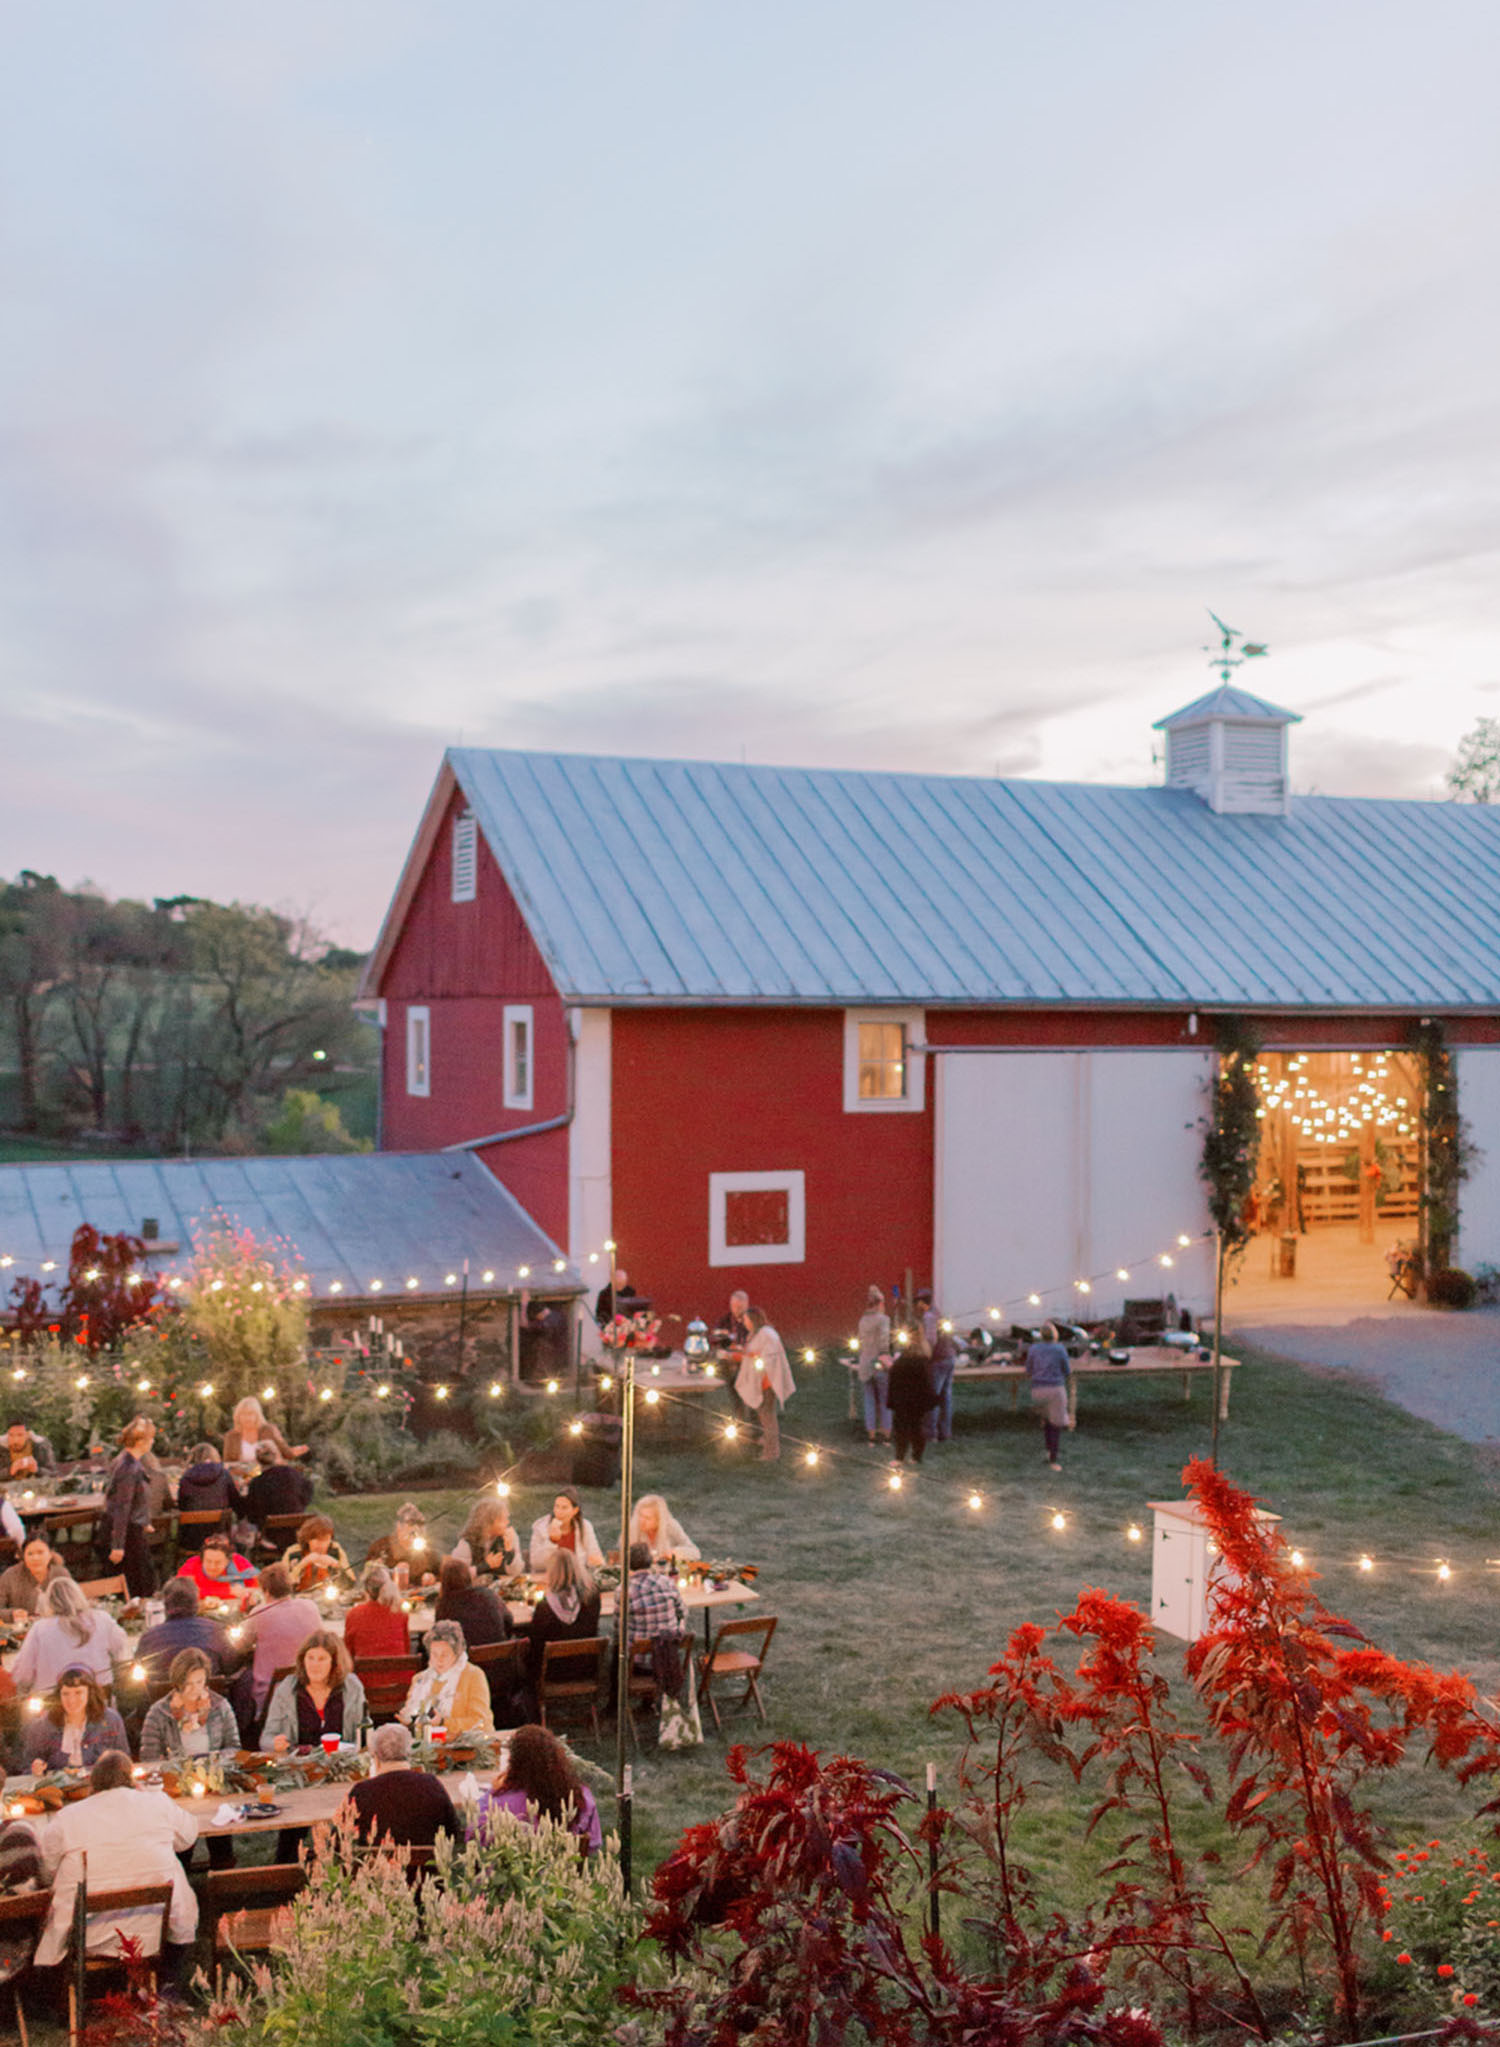 String lights illuminate tables at an outdoor celebration at dusk. In the background is a large red barn with a tin roof and weather vane